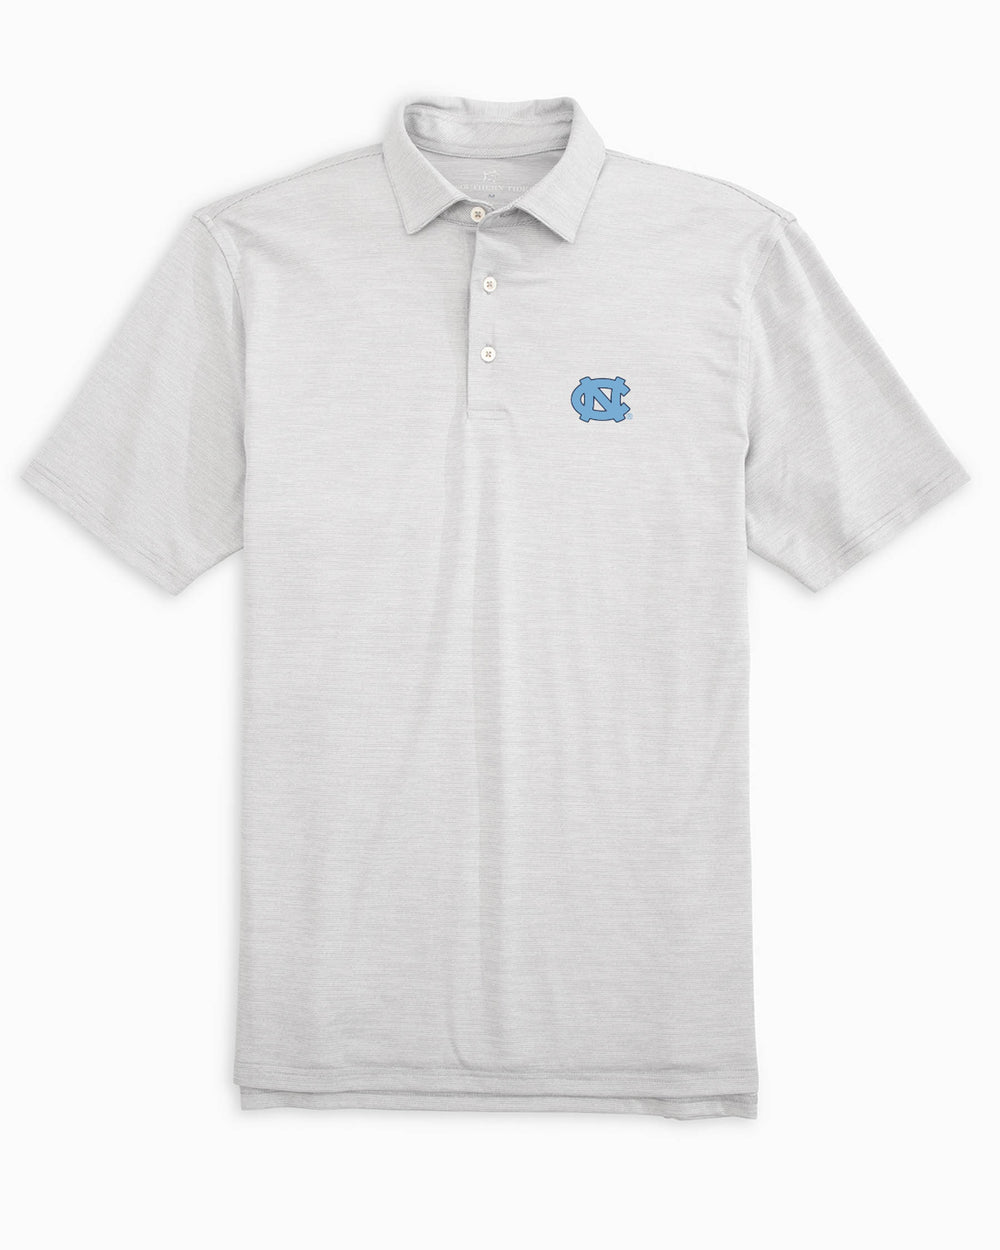 The front of the UNC Tar Heels Driver Spacedye Performance Polo Shirt by Southern Tide - Slate Grey